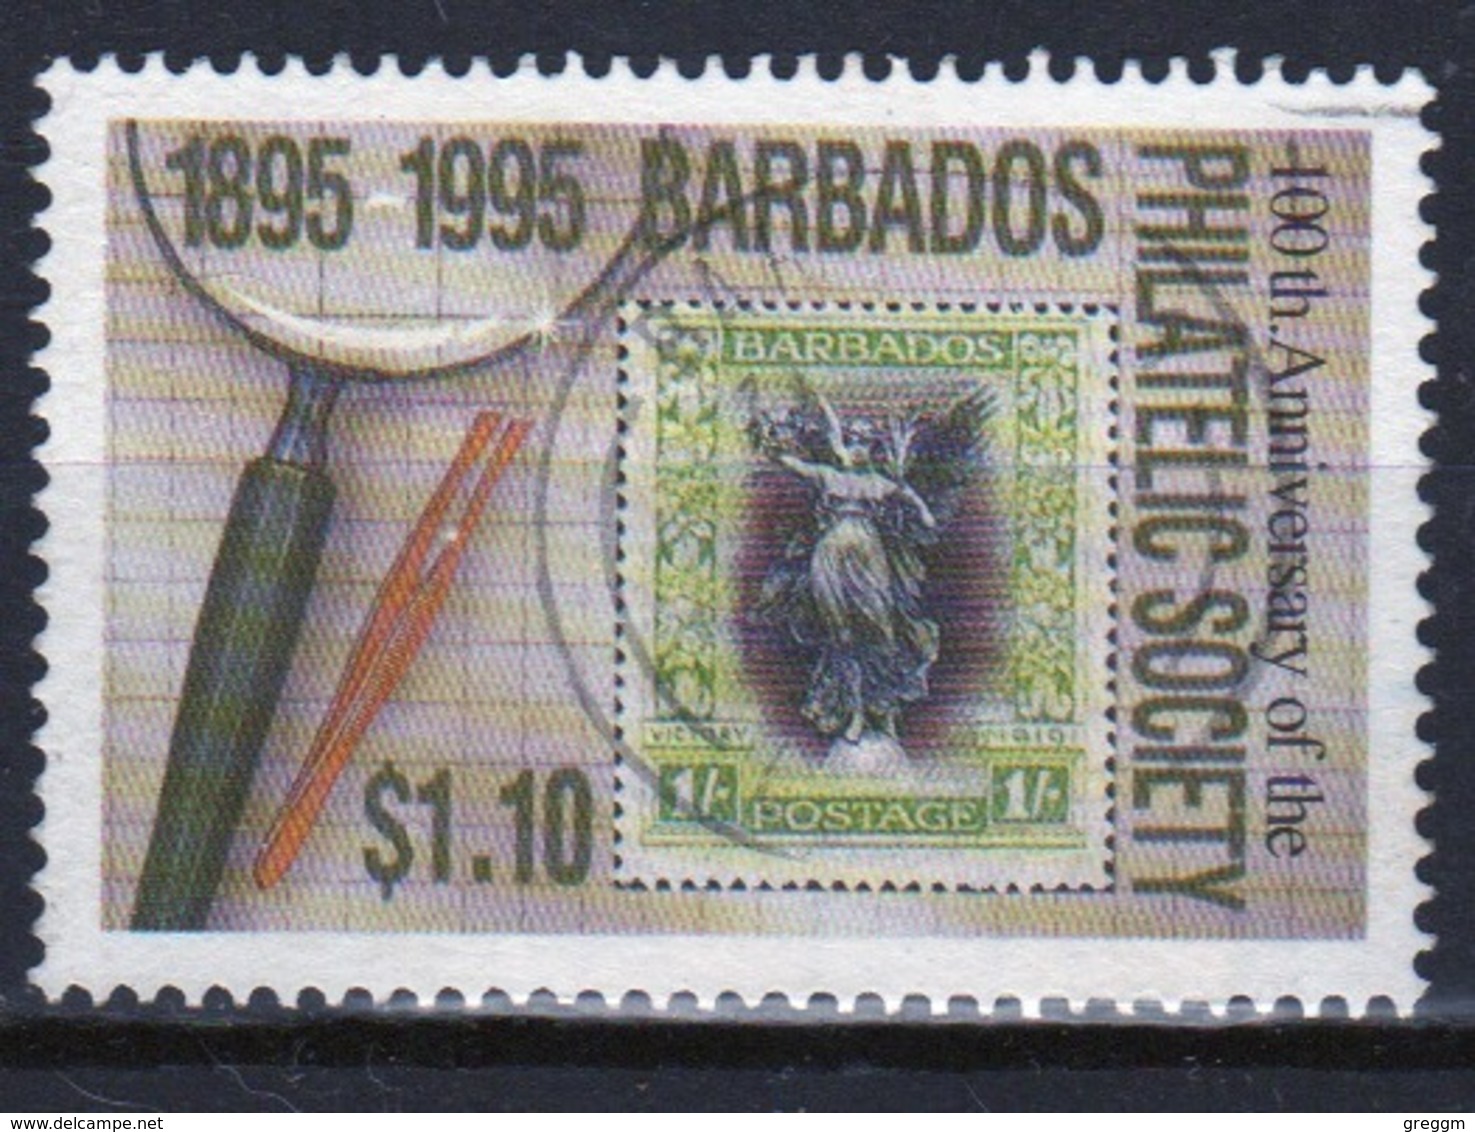 Barbados Single $1.10c Stamp From The 1996 Centenary Of The Philatelic Society. - Barbados (1966-...)